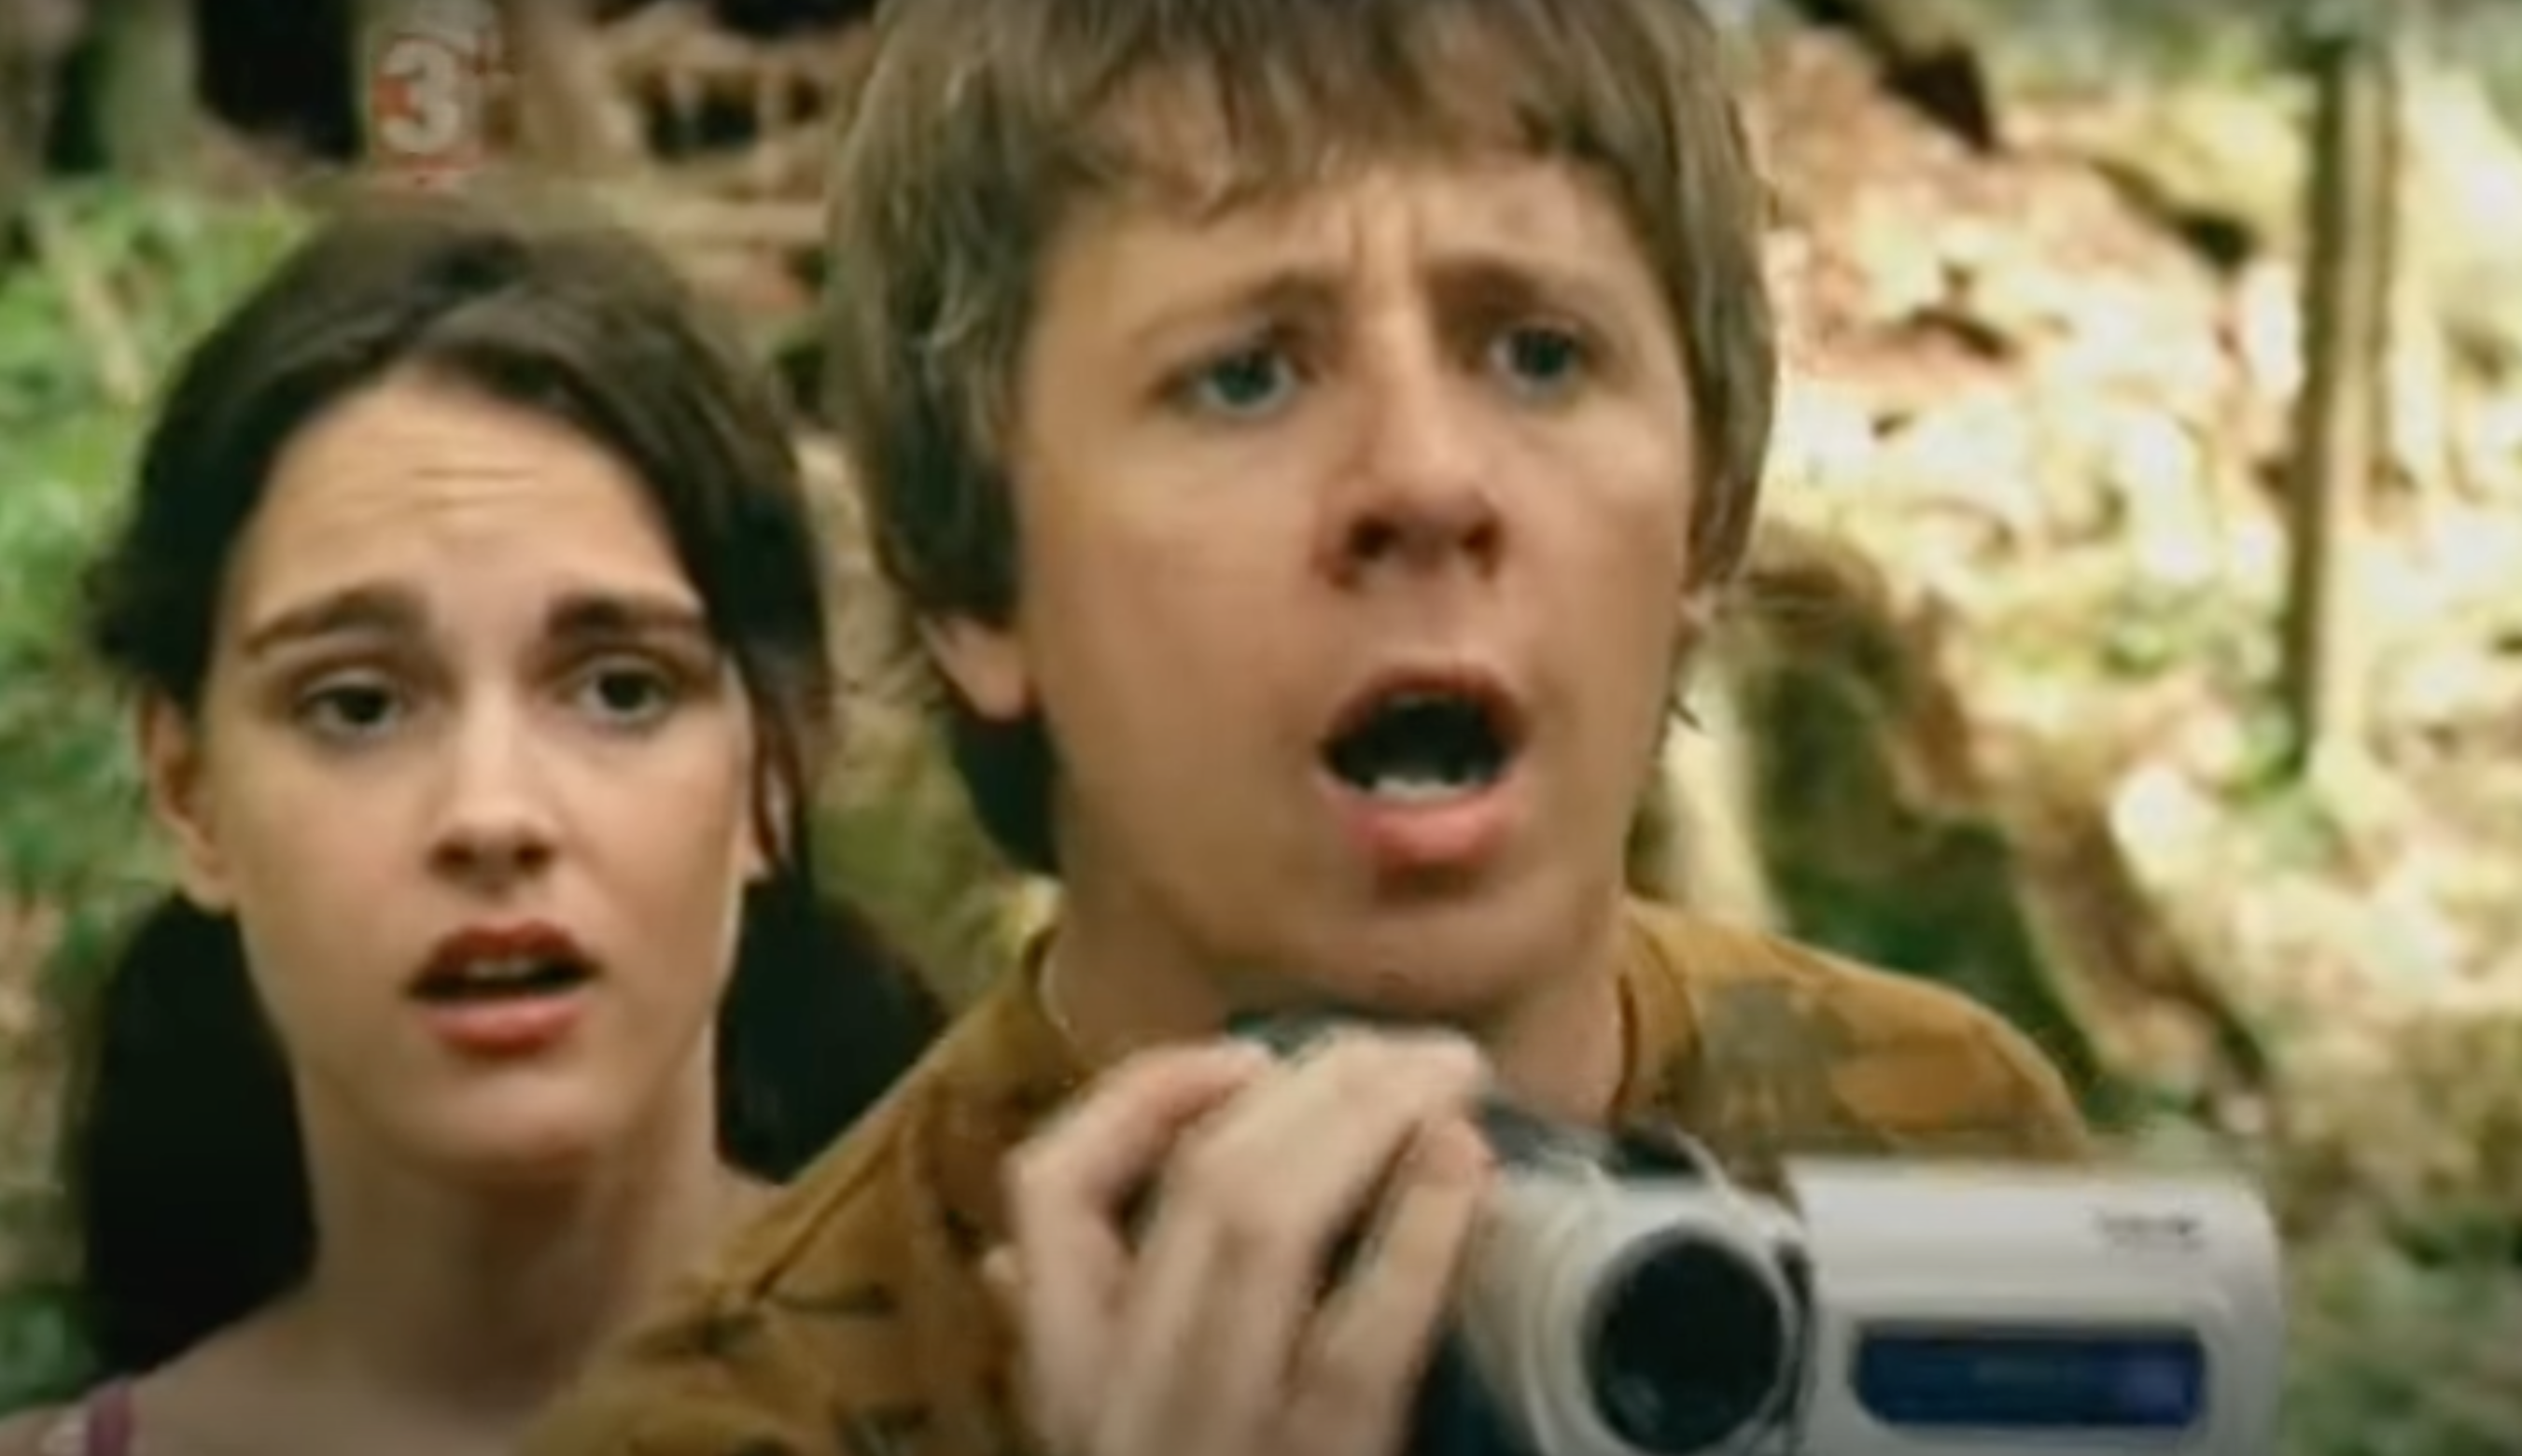 A boy holds a camcorder in shock as a girl stands behind him in the woods.